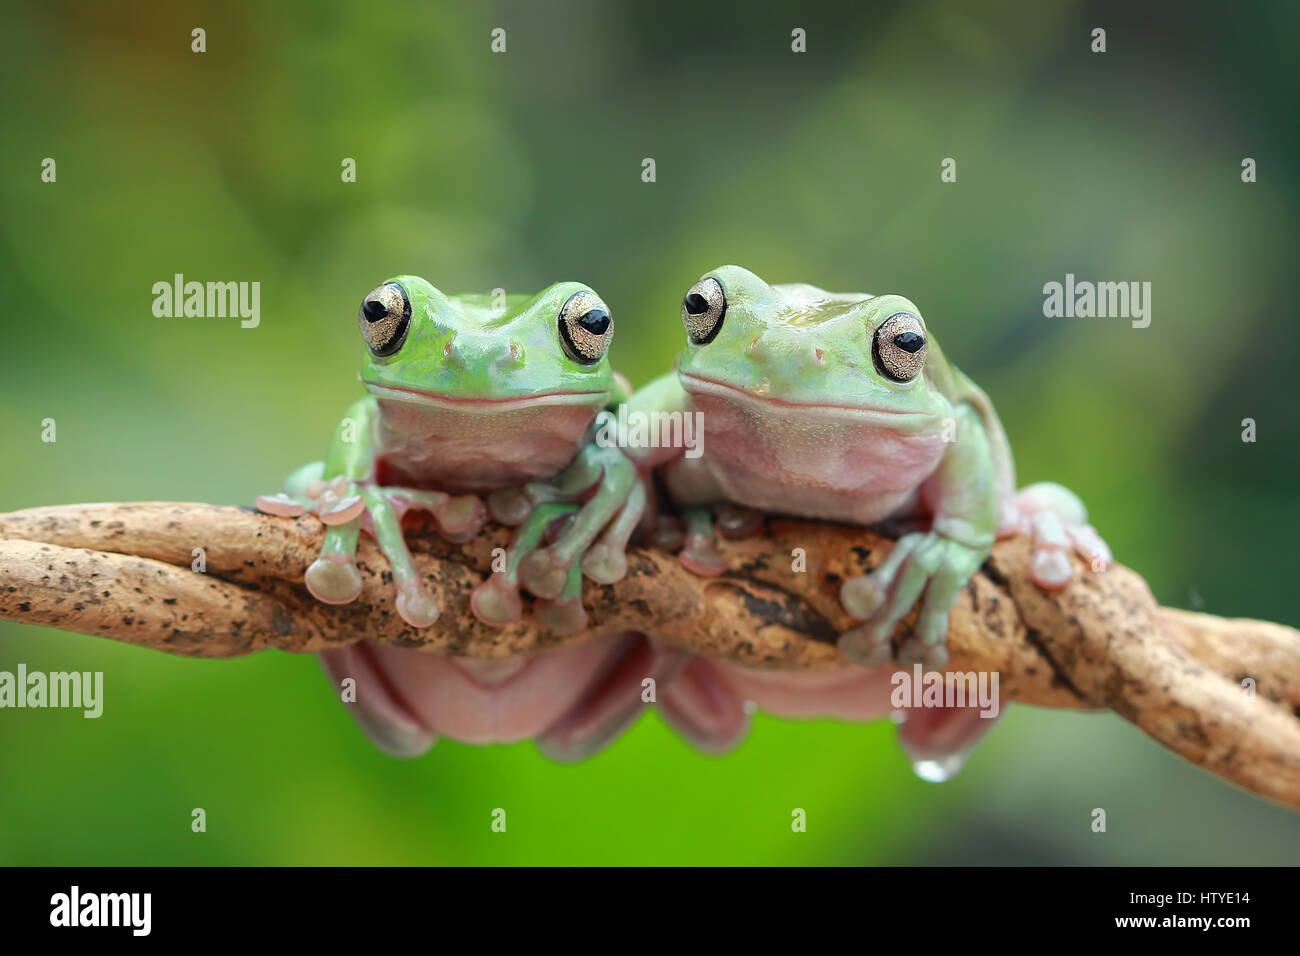 Two Dumpy frogs sitting on branch, Indonesia Stock Photo